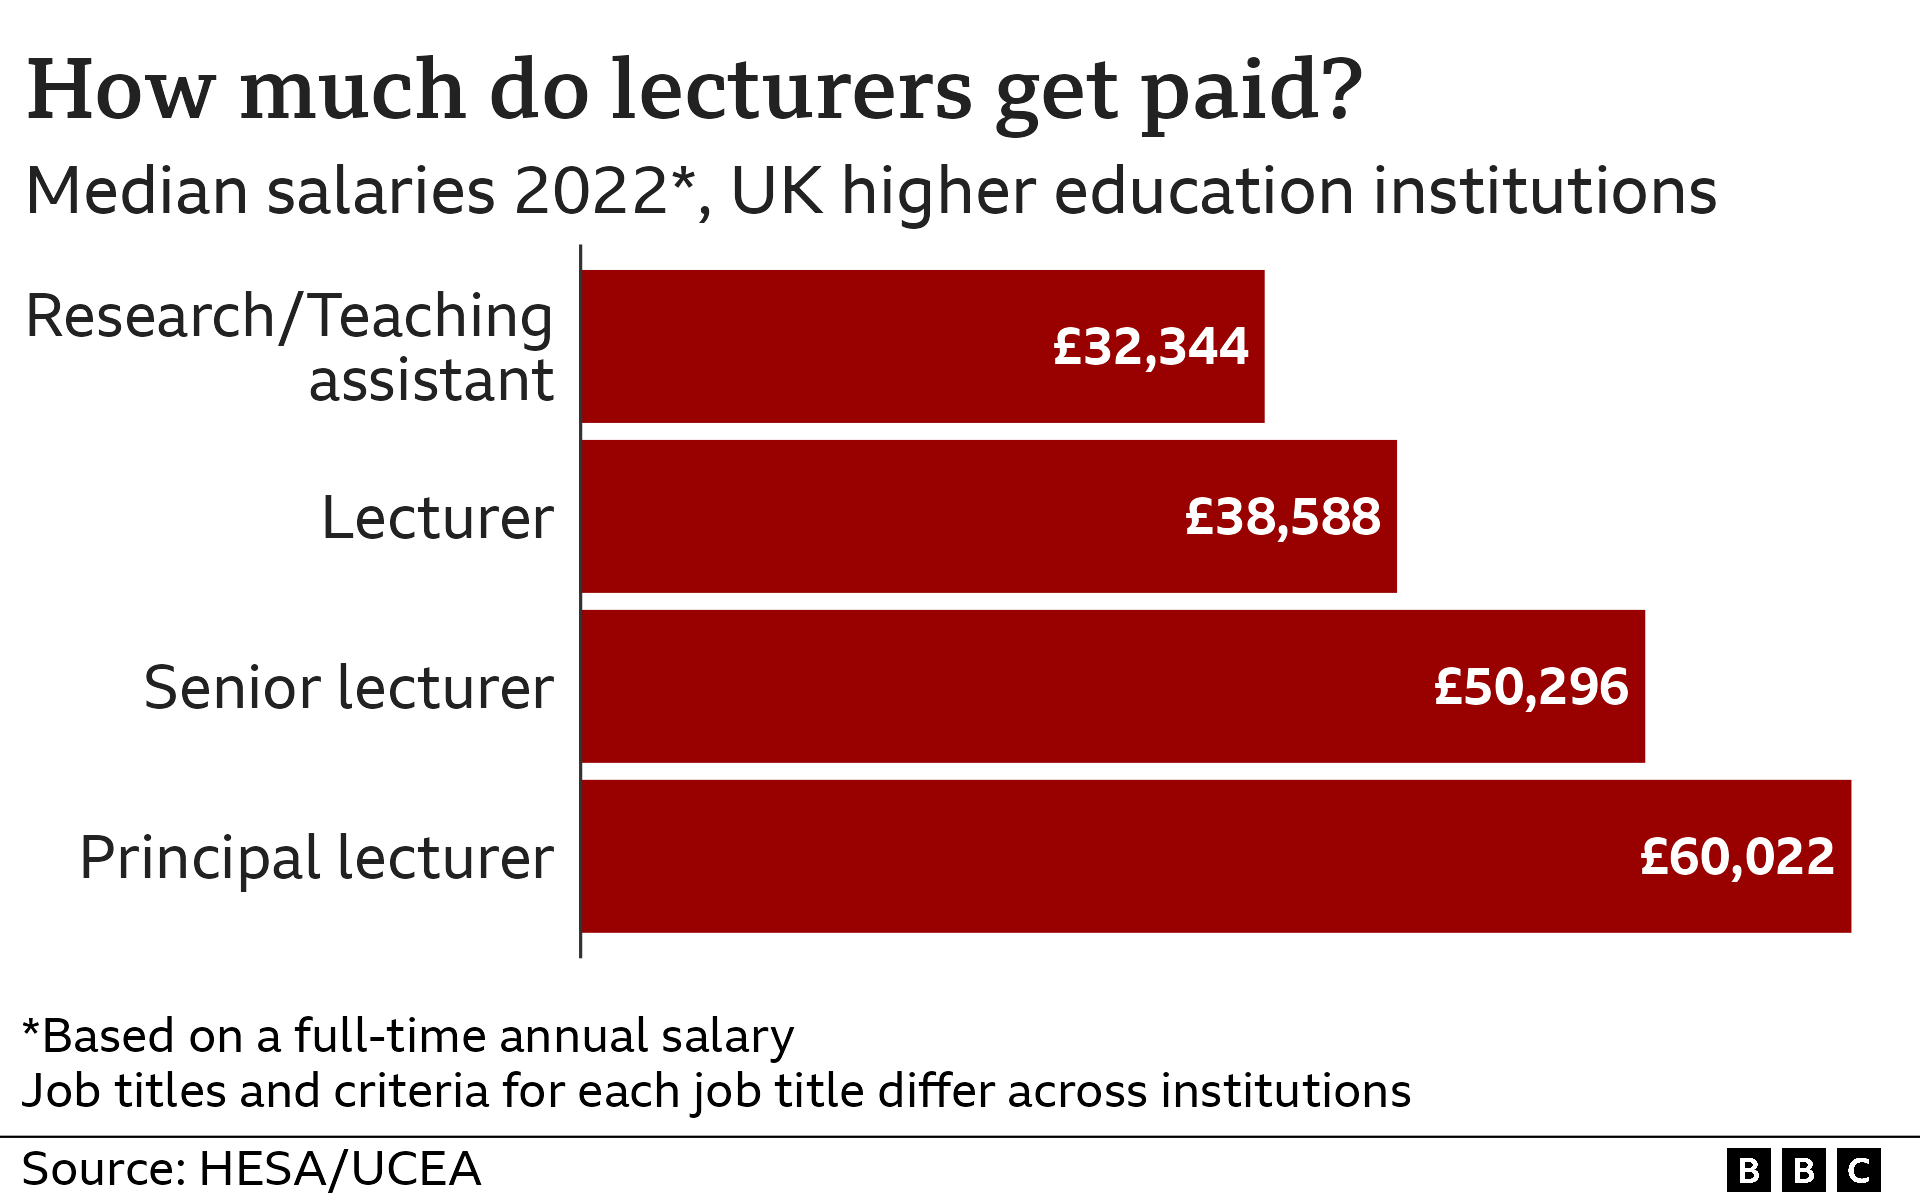 Chart showing how much lecturers get paid based on full-time salaries for 2022, with research/teaching assistants getting an average of £32,344, lecturers £38,588, senior lecturers £50,296 and principal lecturers £60,022